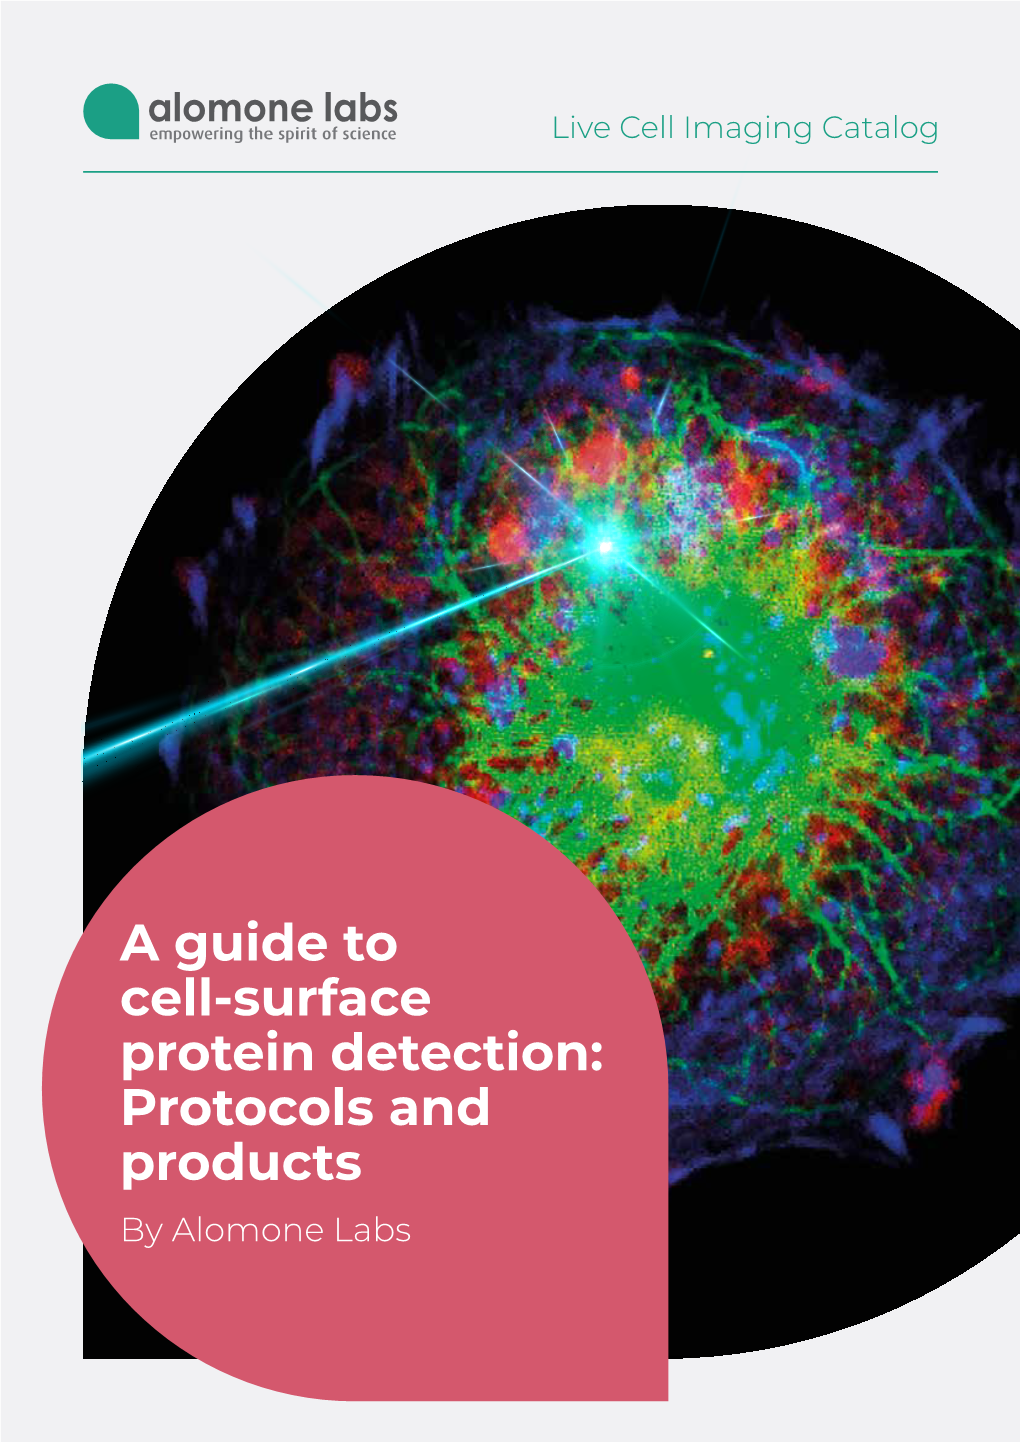 A Guide to Cell-Surface Protein Detection: Protocols and Products by Alomone Labs Contents